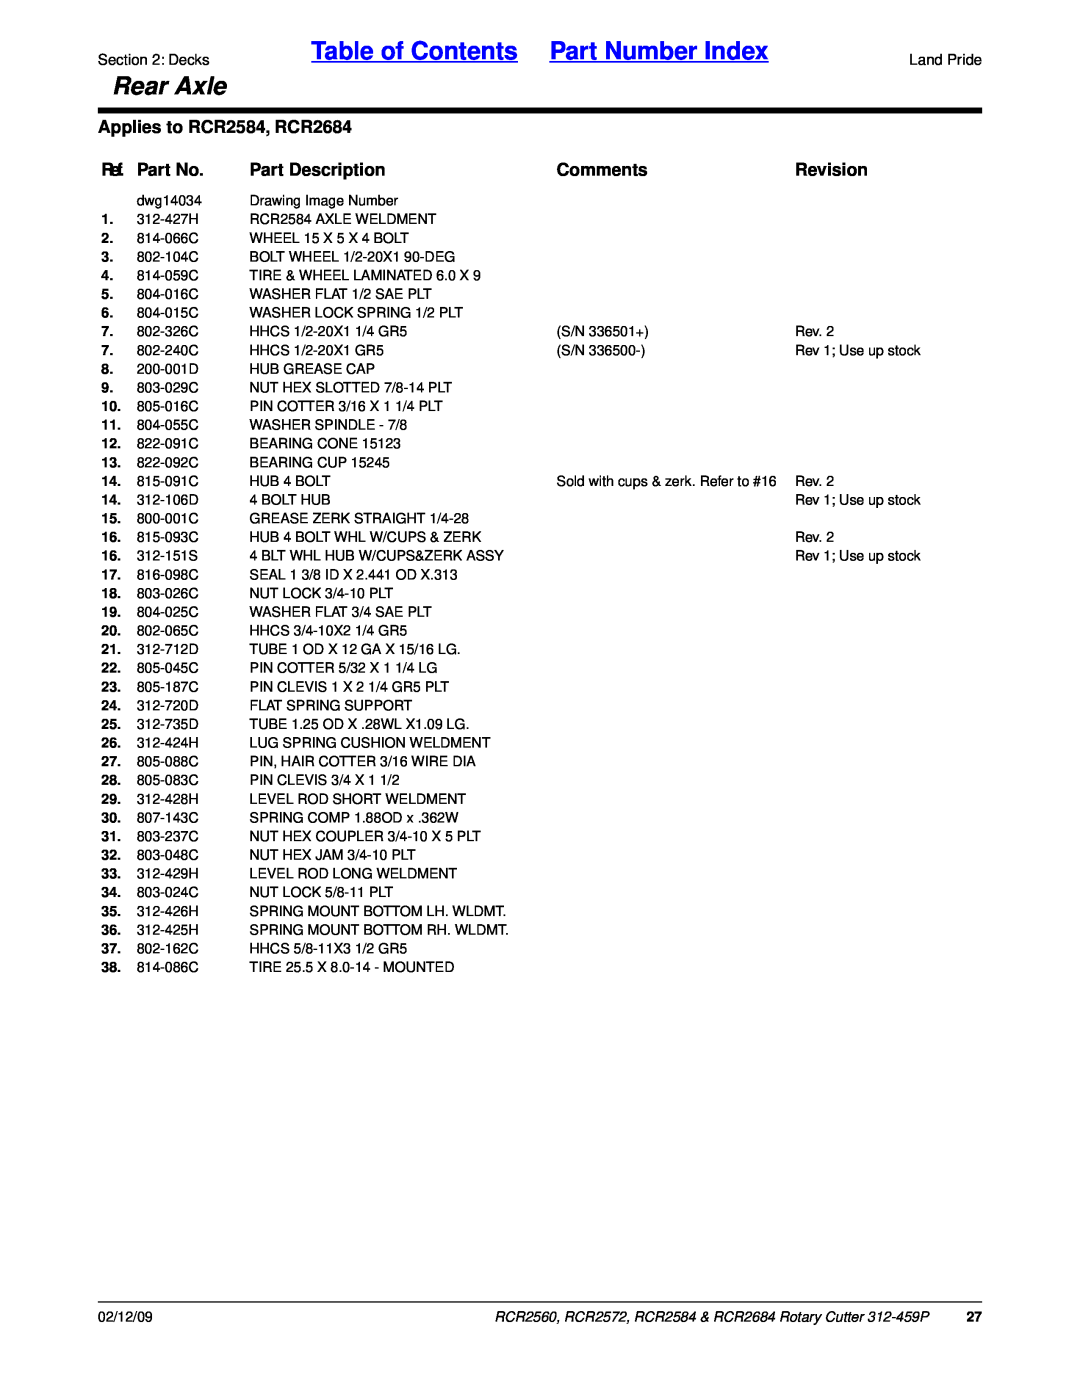 Land Pride RCR2560 Table of Contents Part Number Index, Rear Axle, Applies to RCR2584, RCR2684, Ref. Part No, Comments 